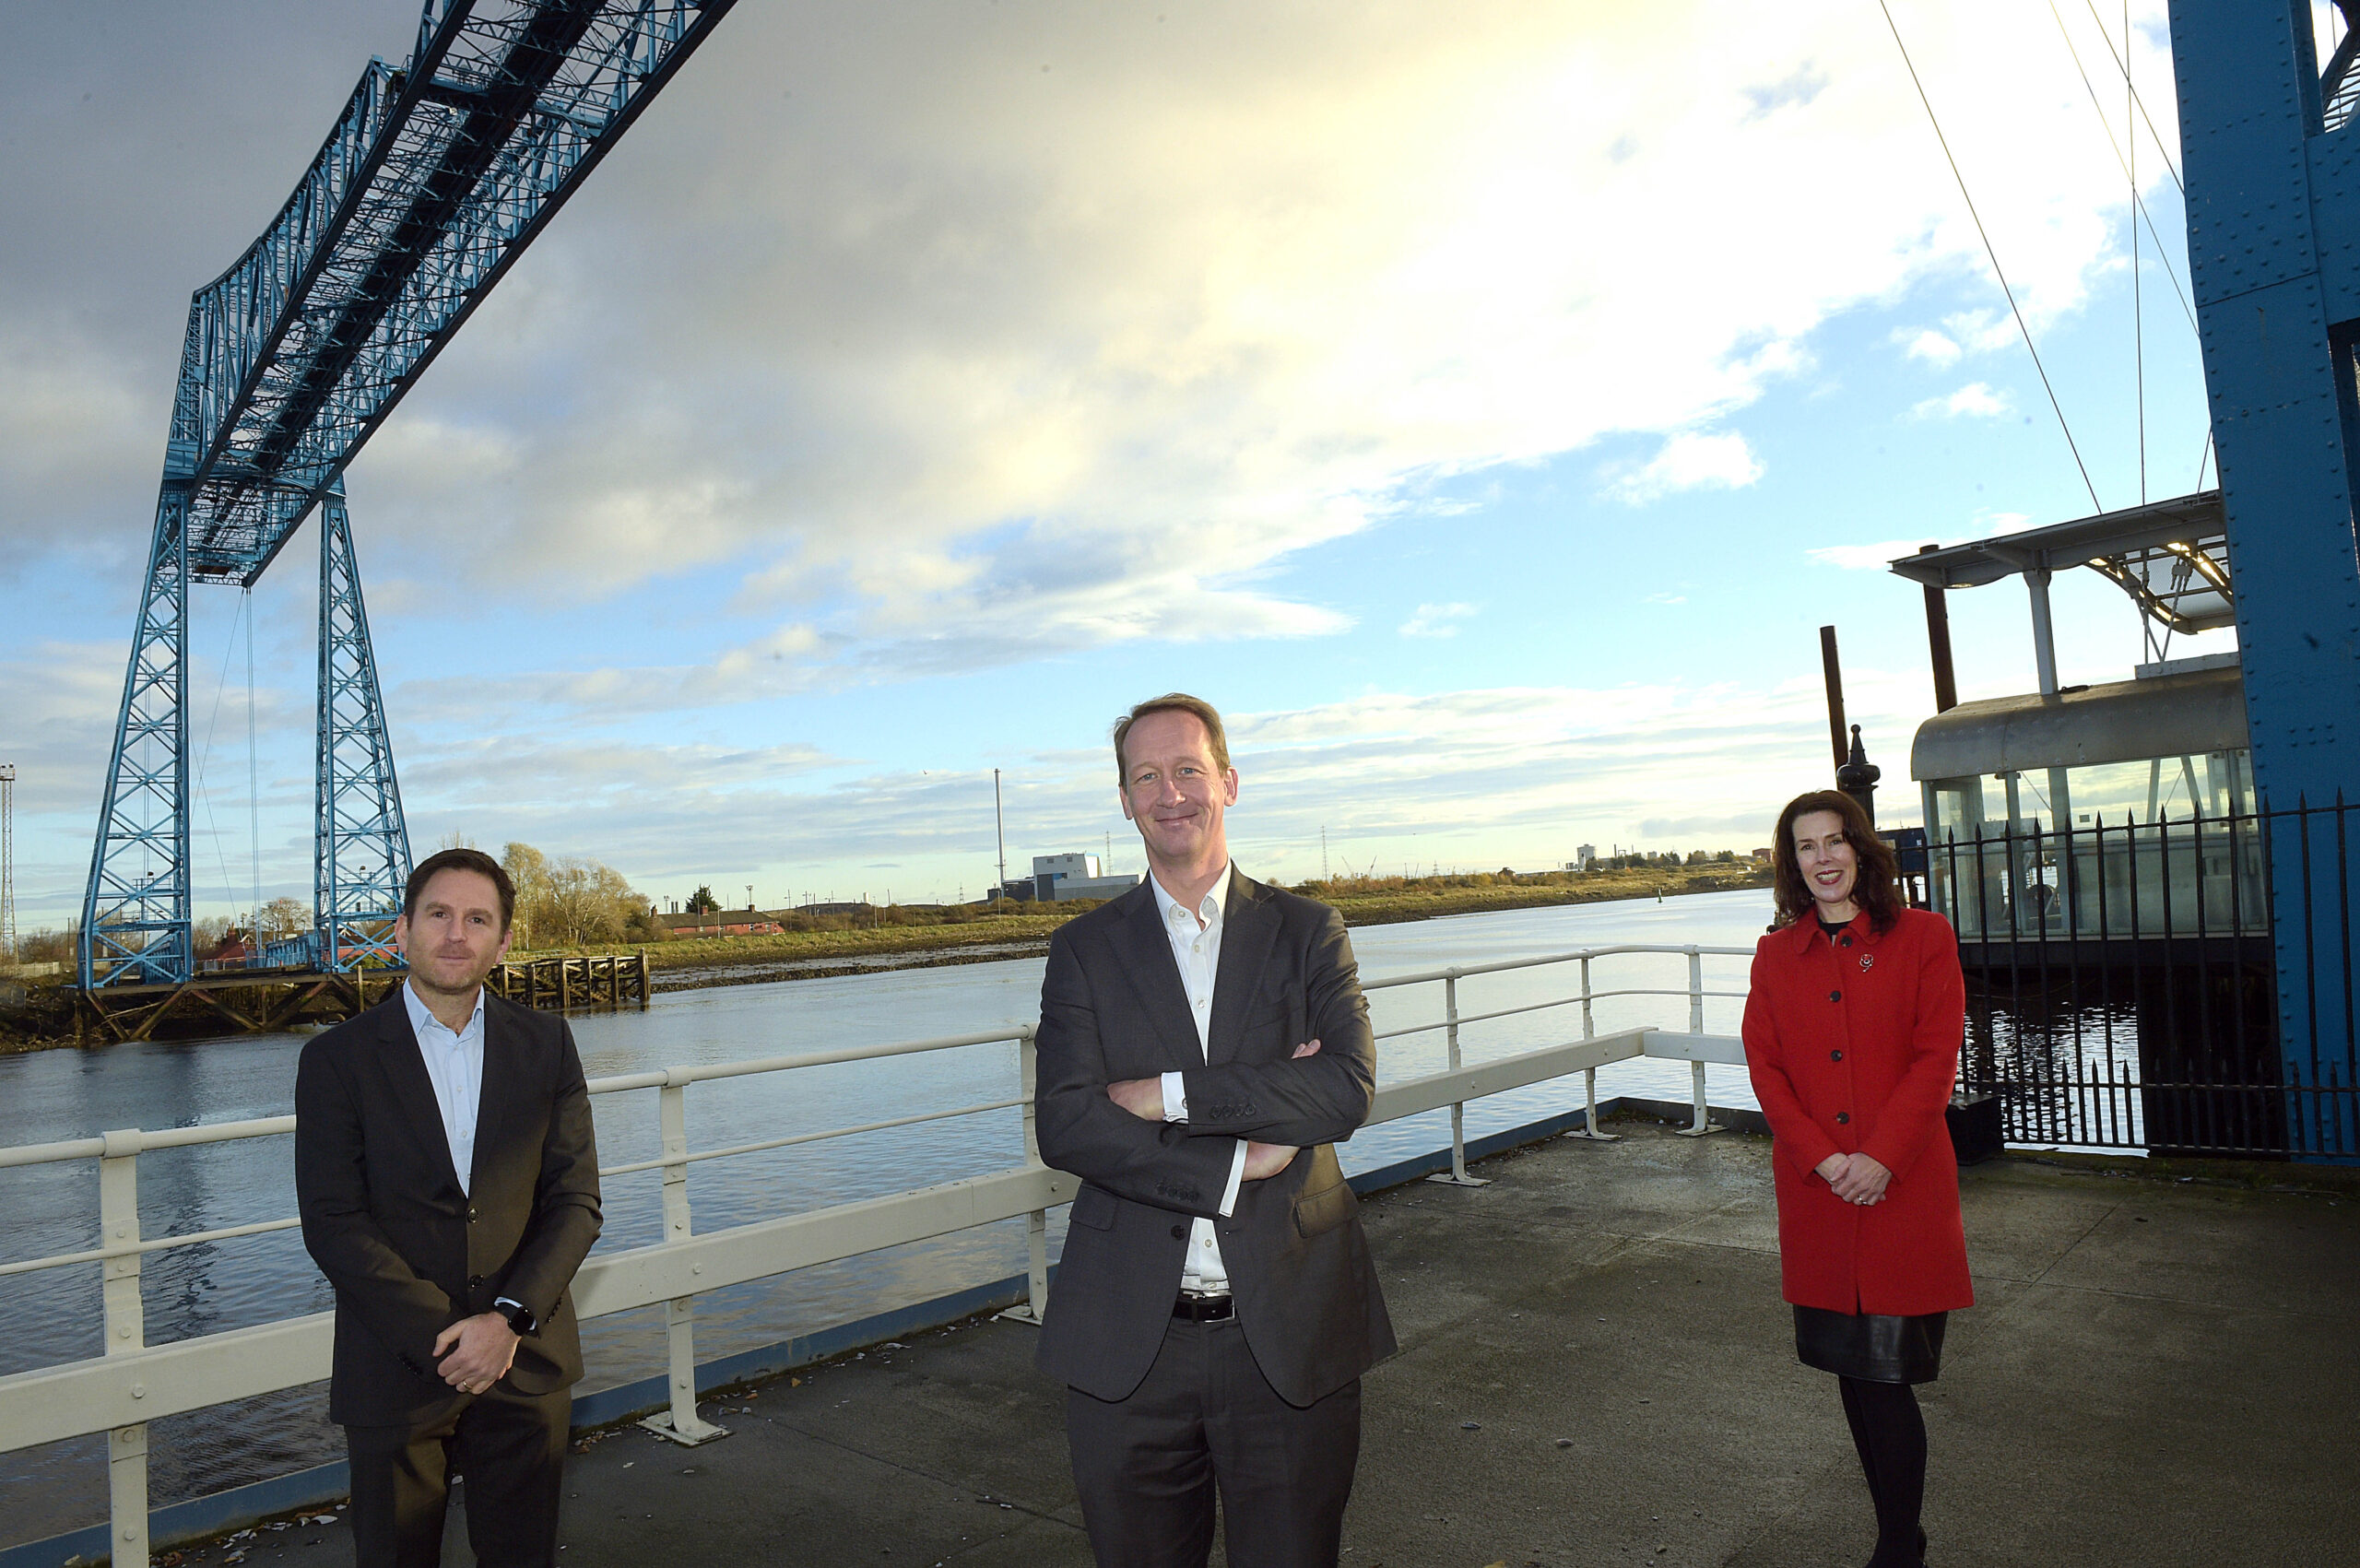 PD Ports launch new scheme for the River Tees
12/11/20  Pic Doug Moody Photography.